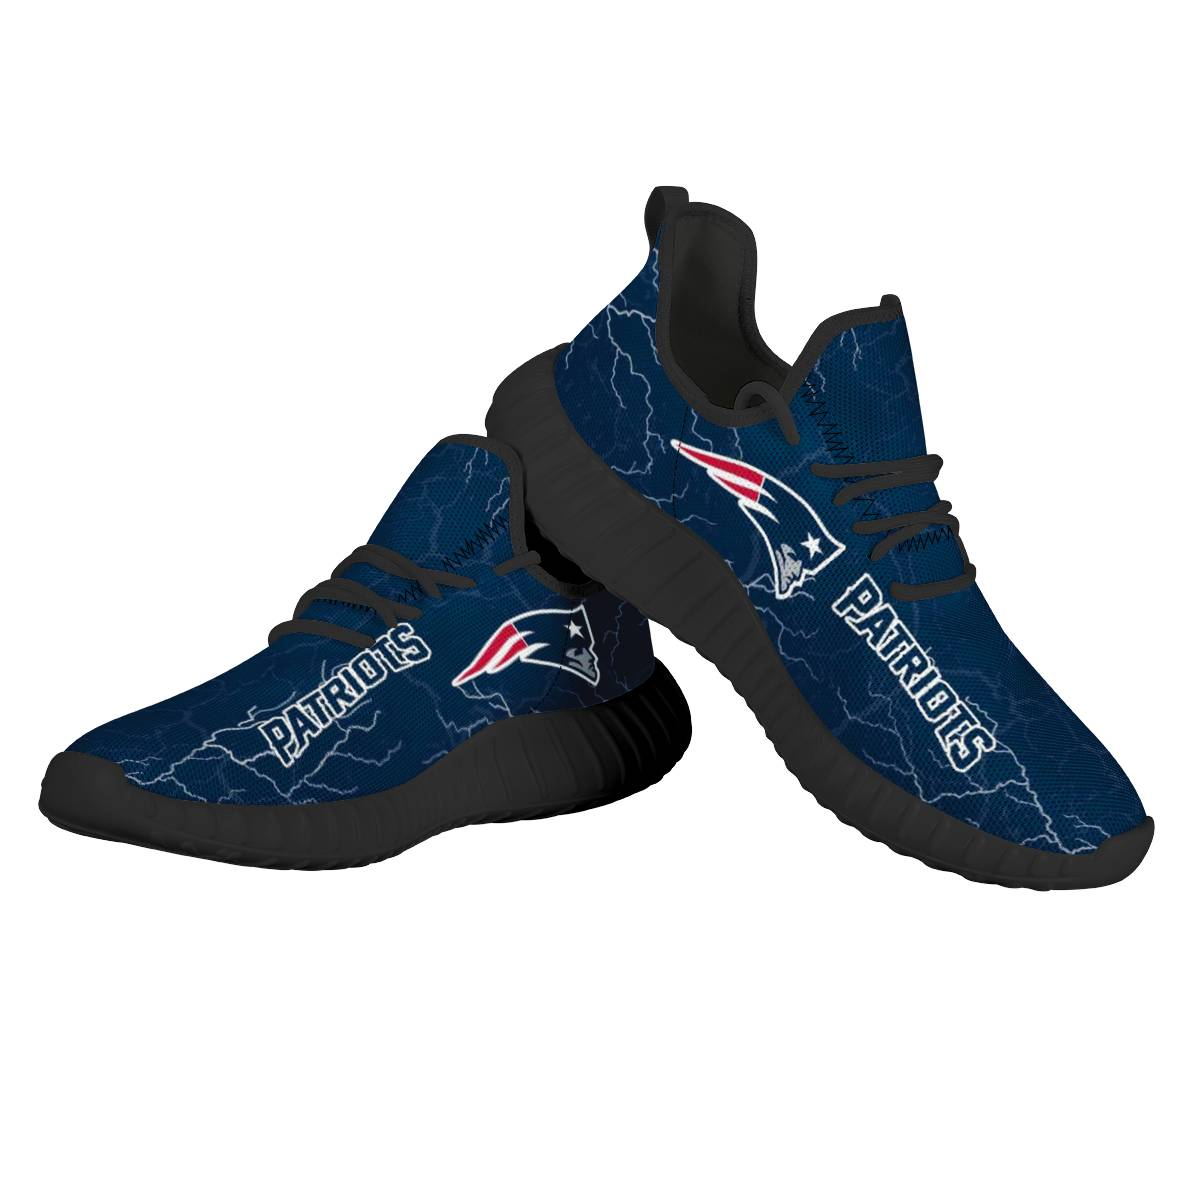 Women's NFL New England Patriots Mesh Knit Sneakers/Shoes 007